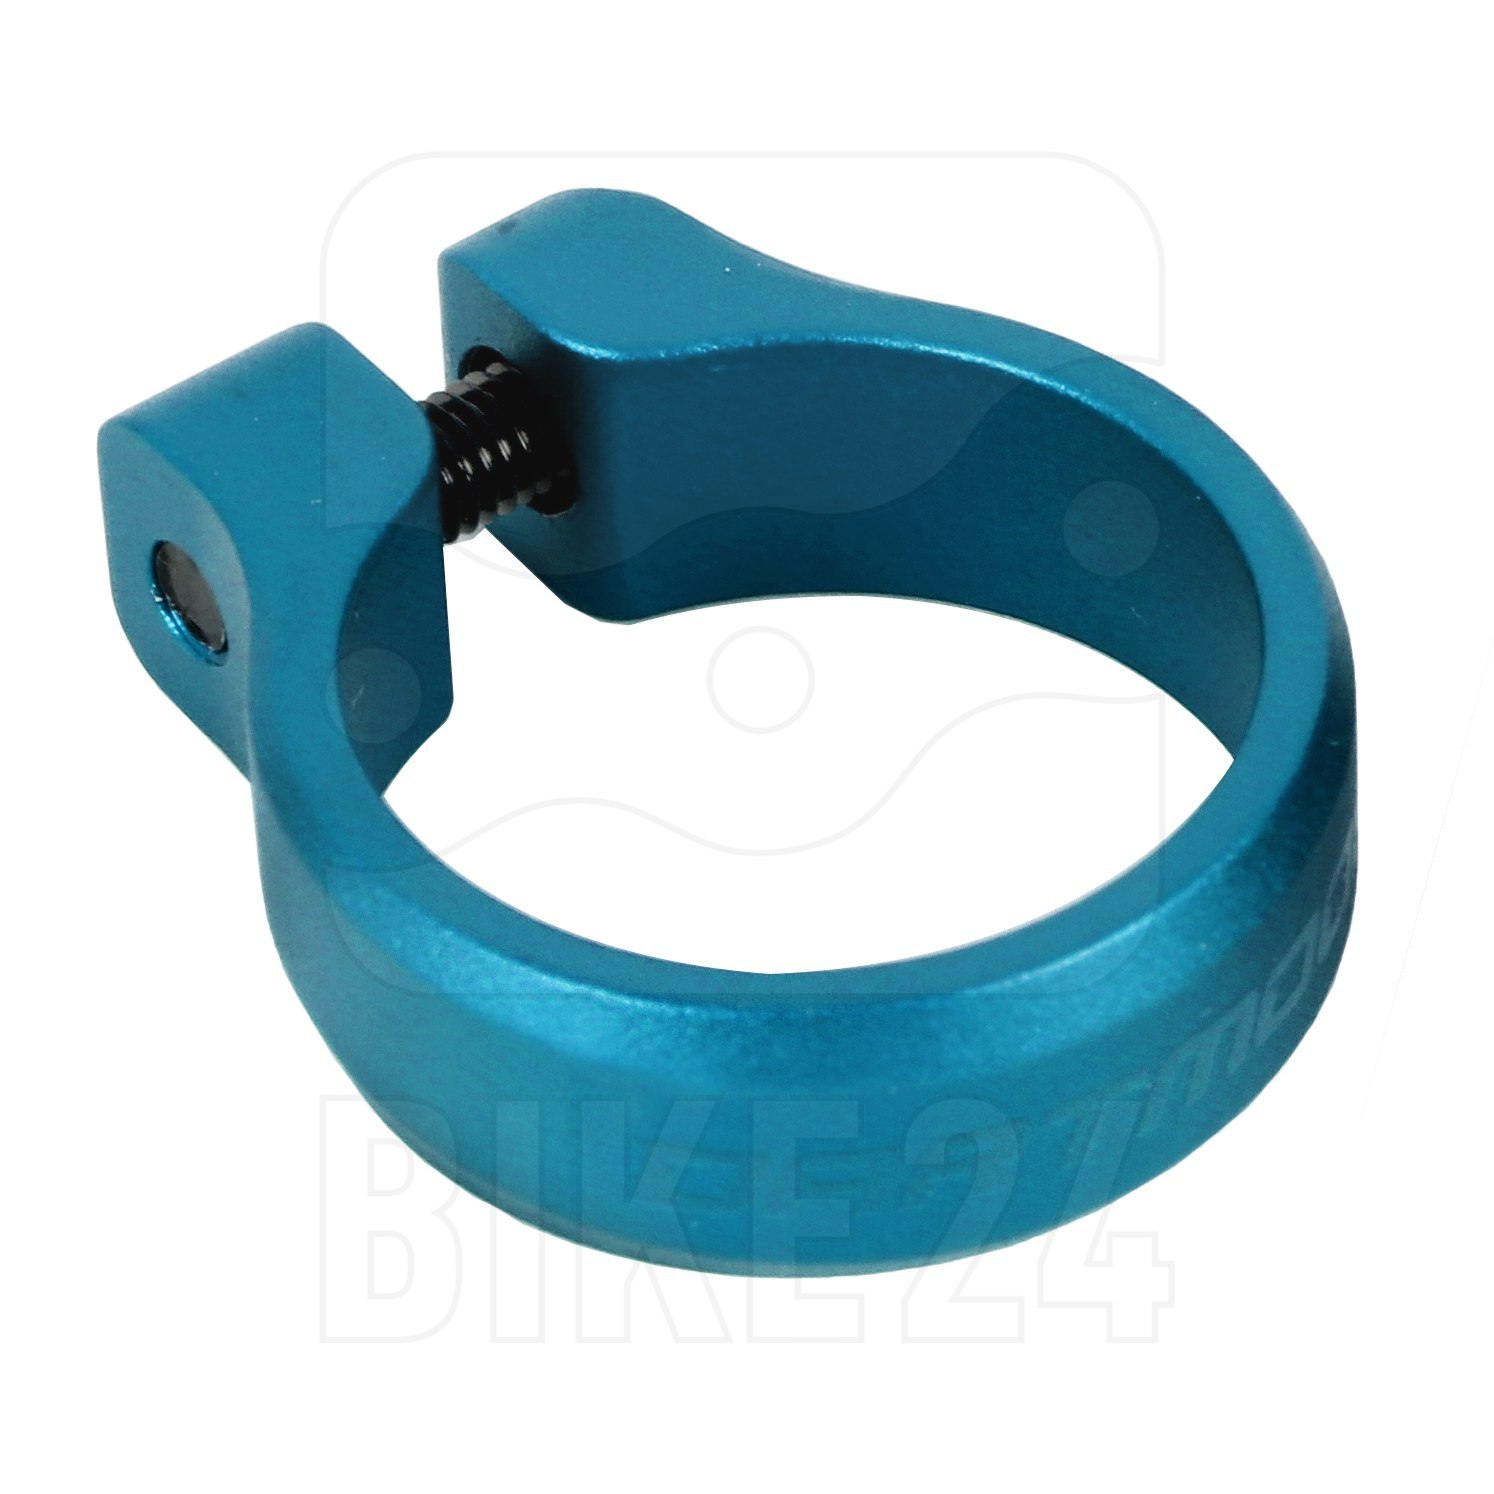 Picture of Dartmoor Loop Saddle Clamp - turquoise